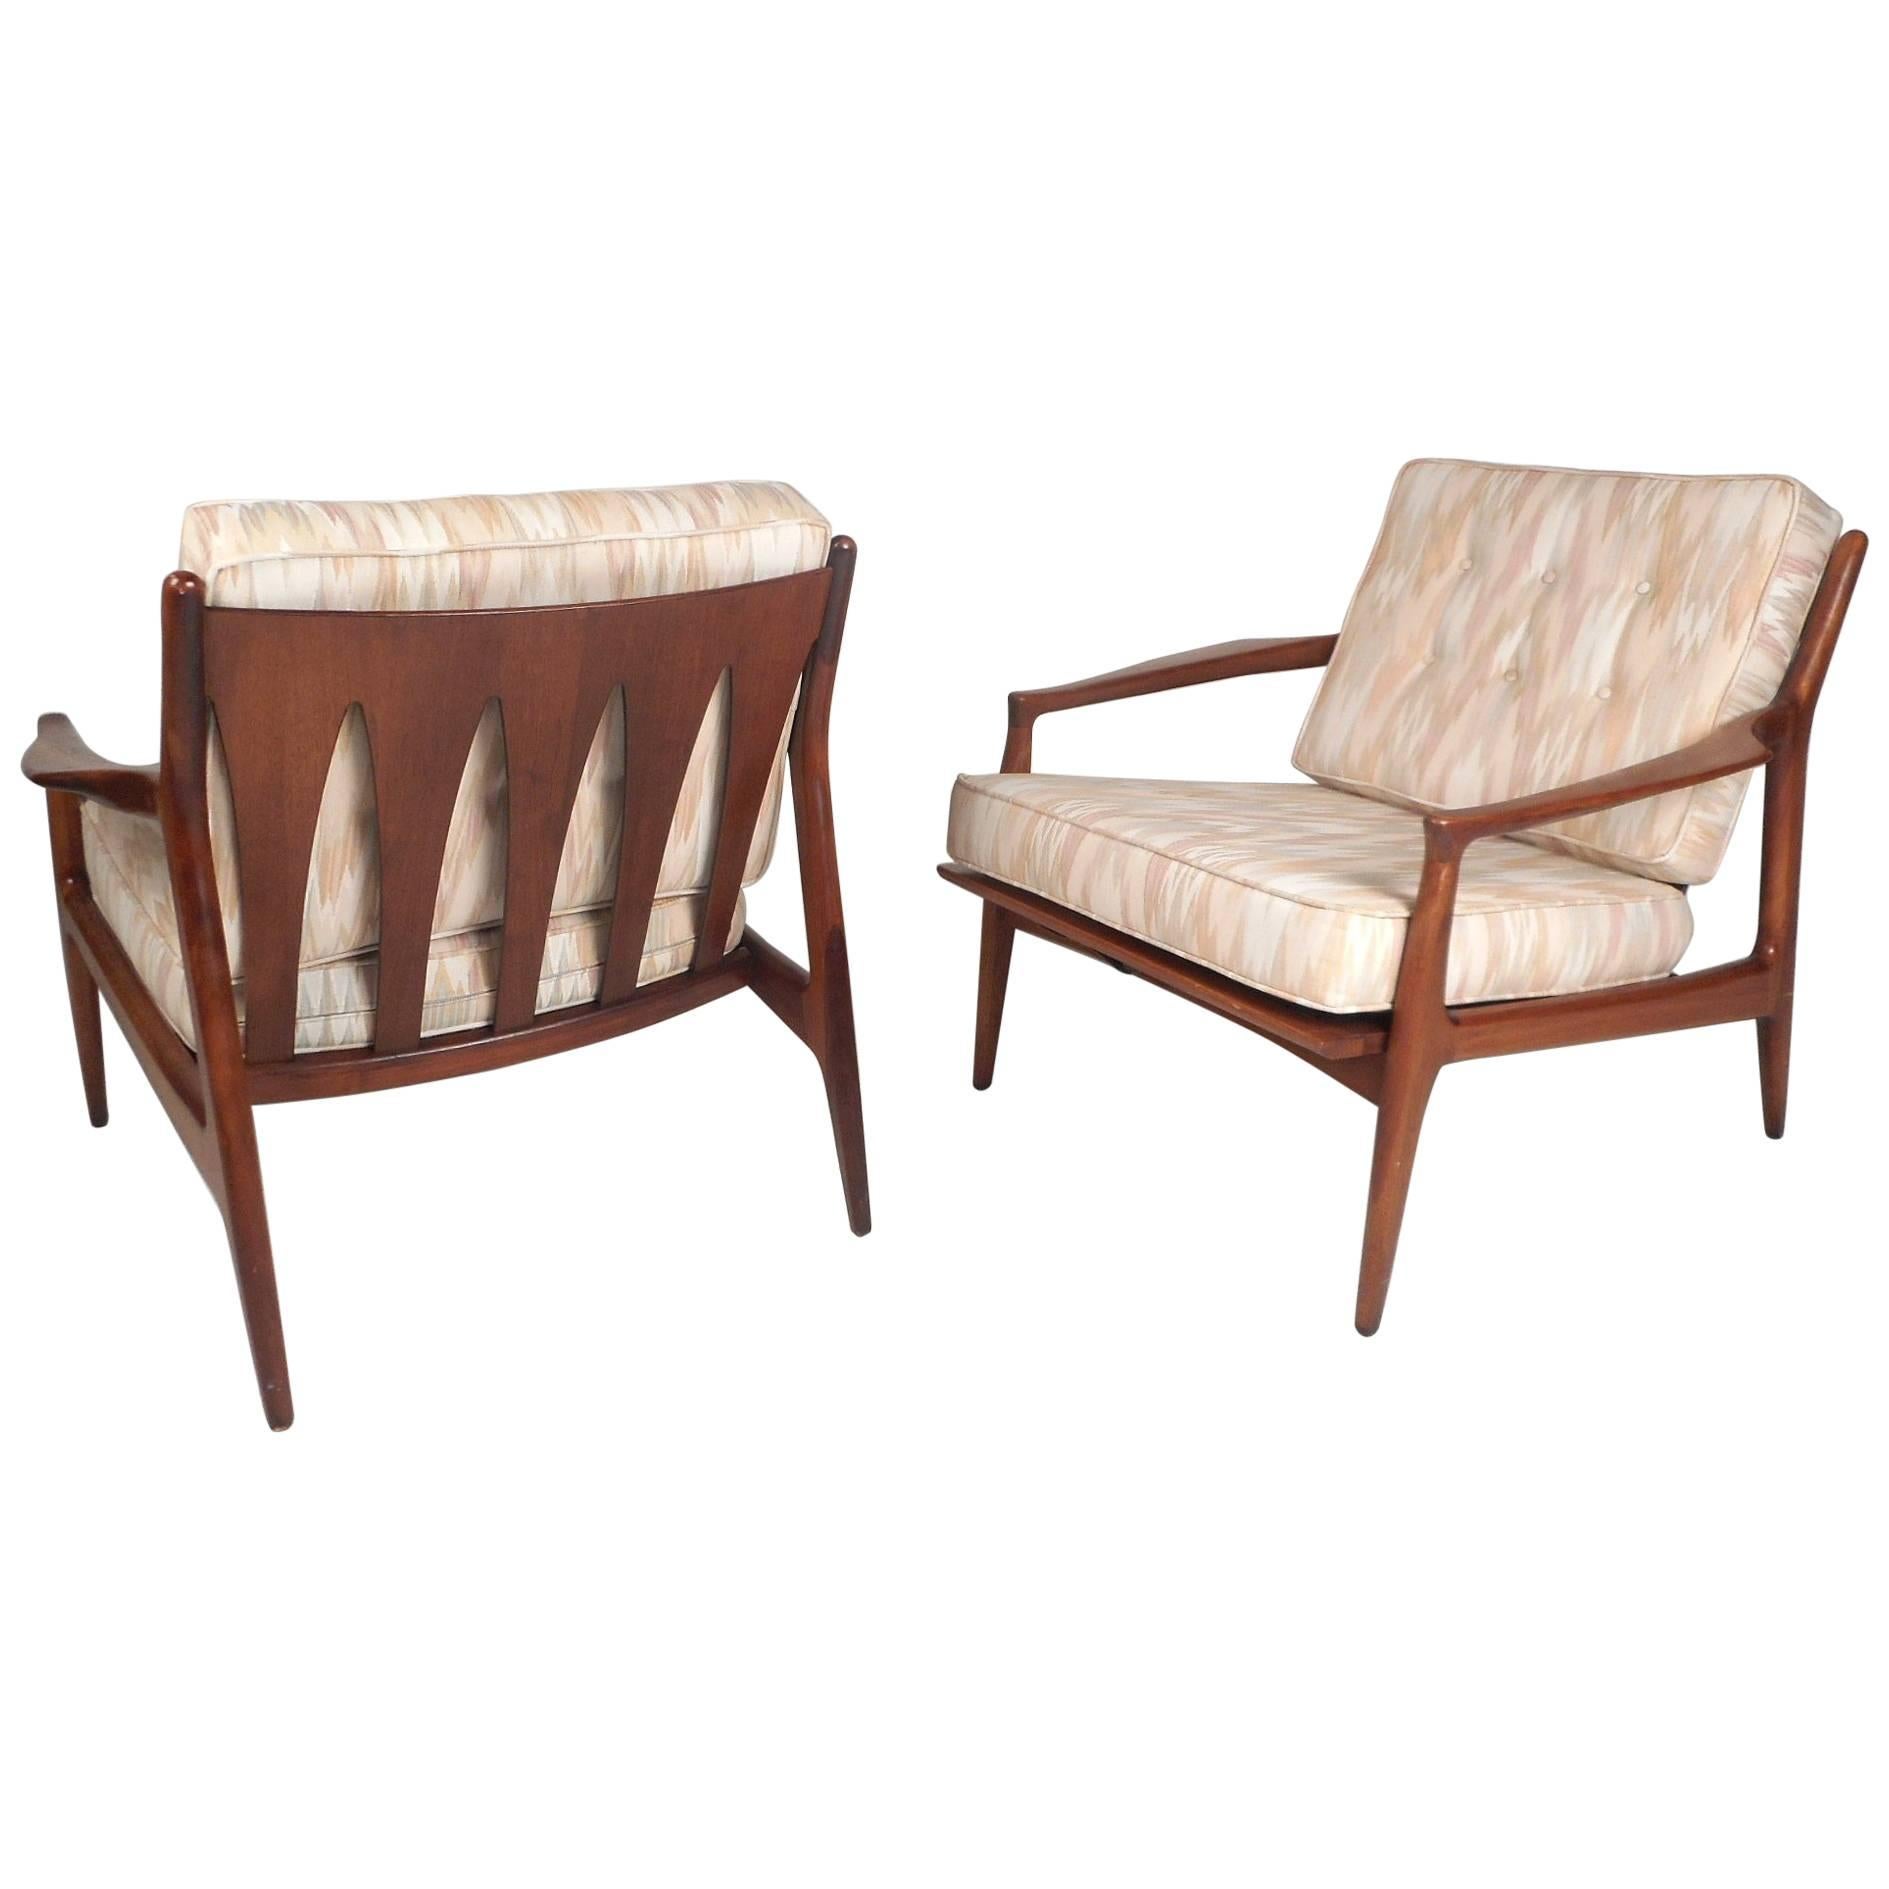 Pair of Mid-Century Modern Walnut Lounge Chairs in the Manner of Ib Kofod Larson